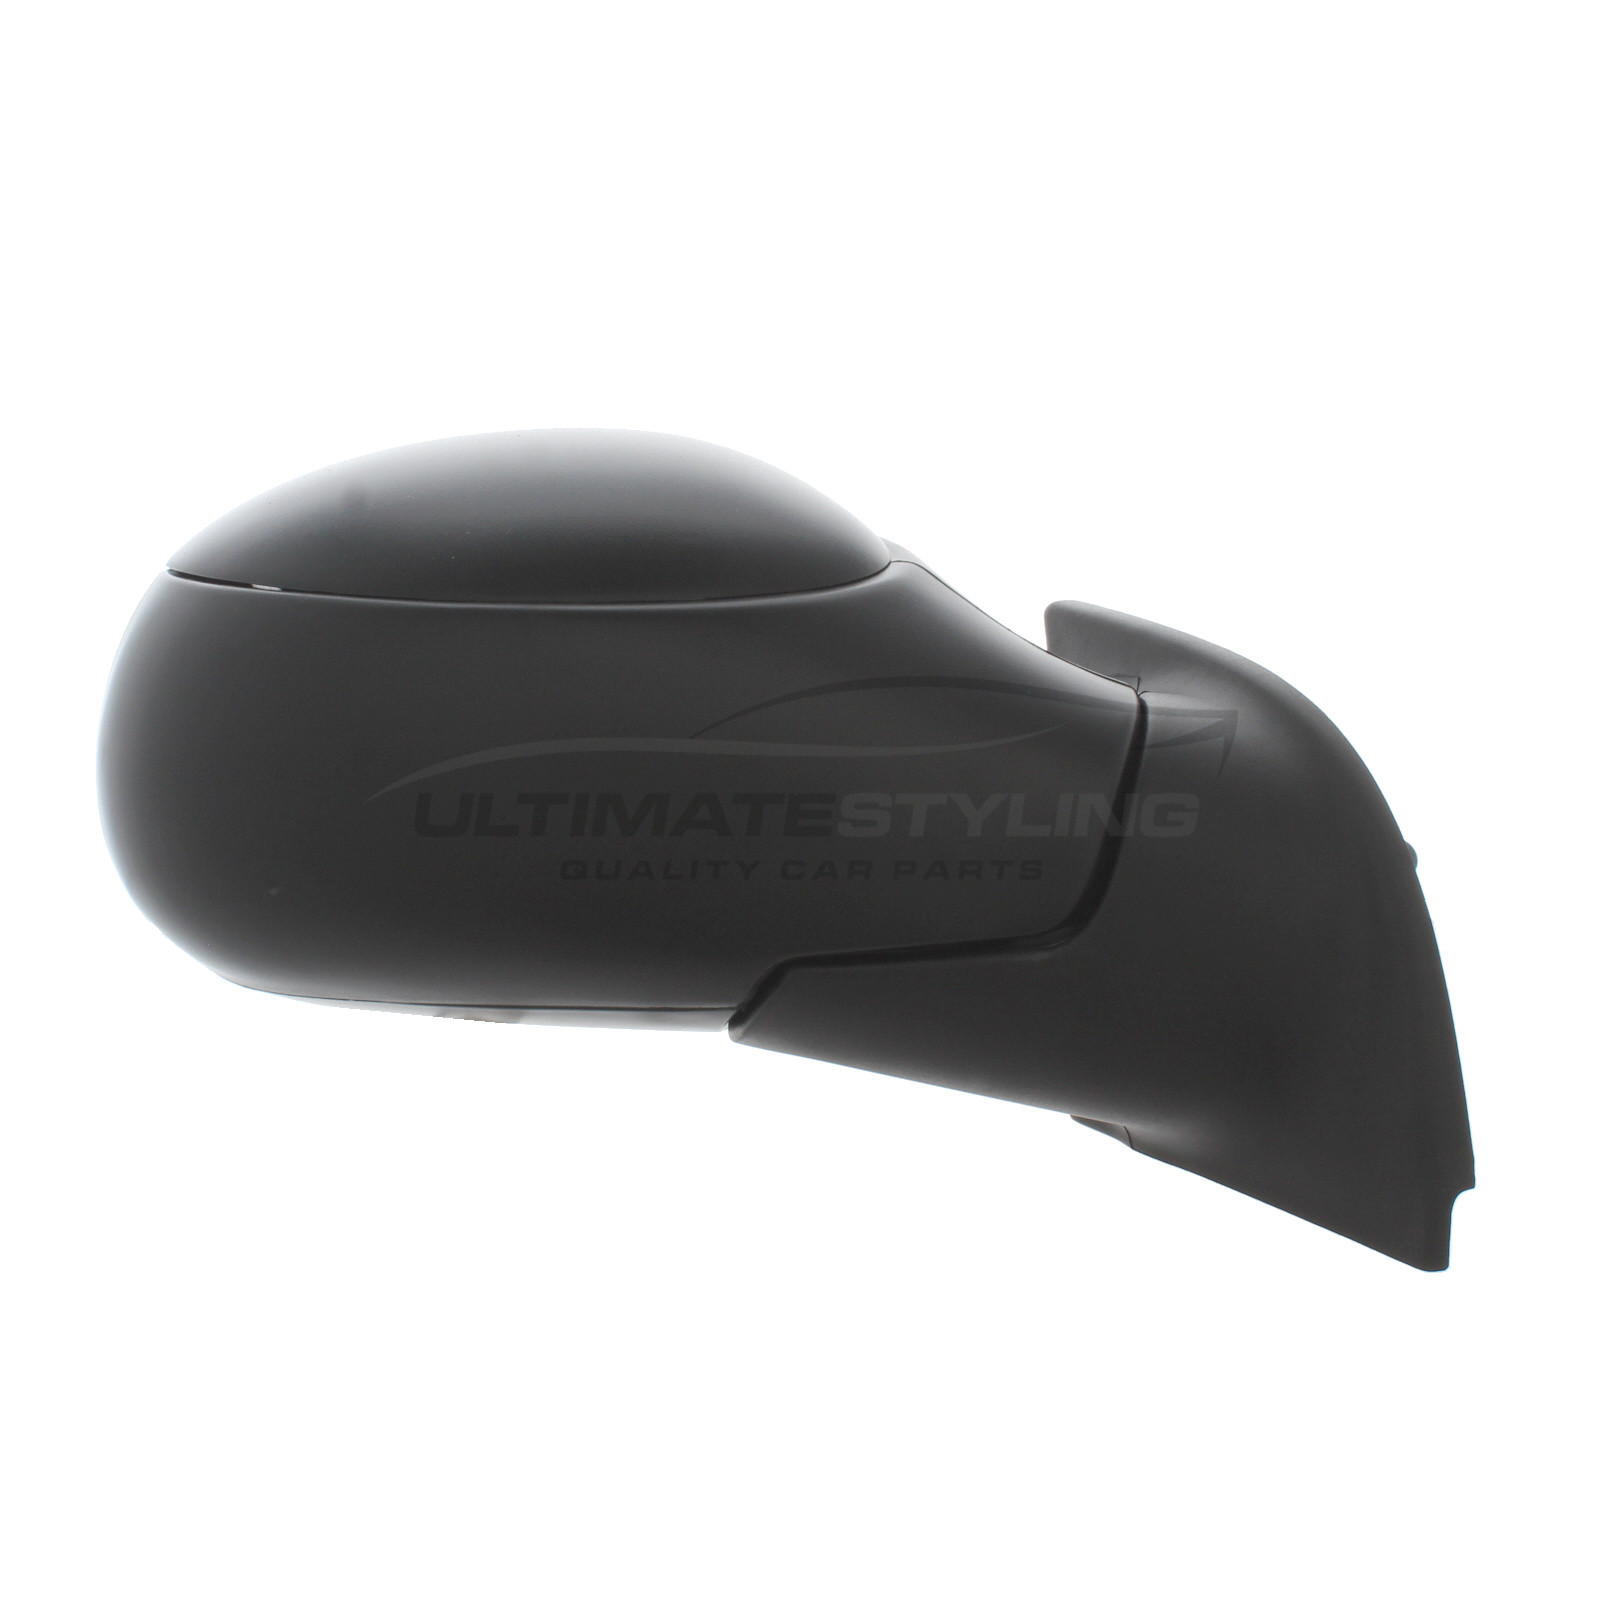 Citroen C3 Wing Mirror / Door Mirror - Drivers Side (RH) - Cable adjustment - Non-Heated Glass - Black